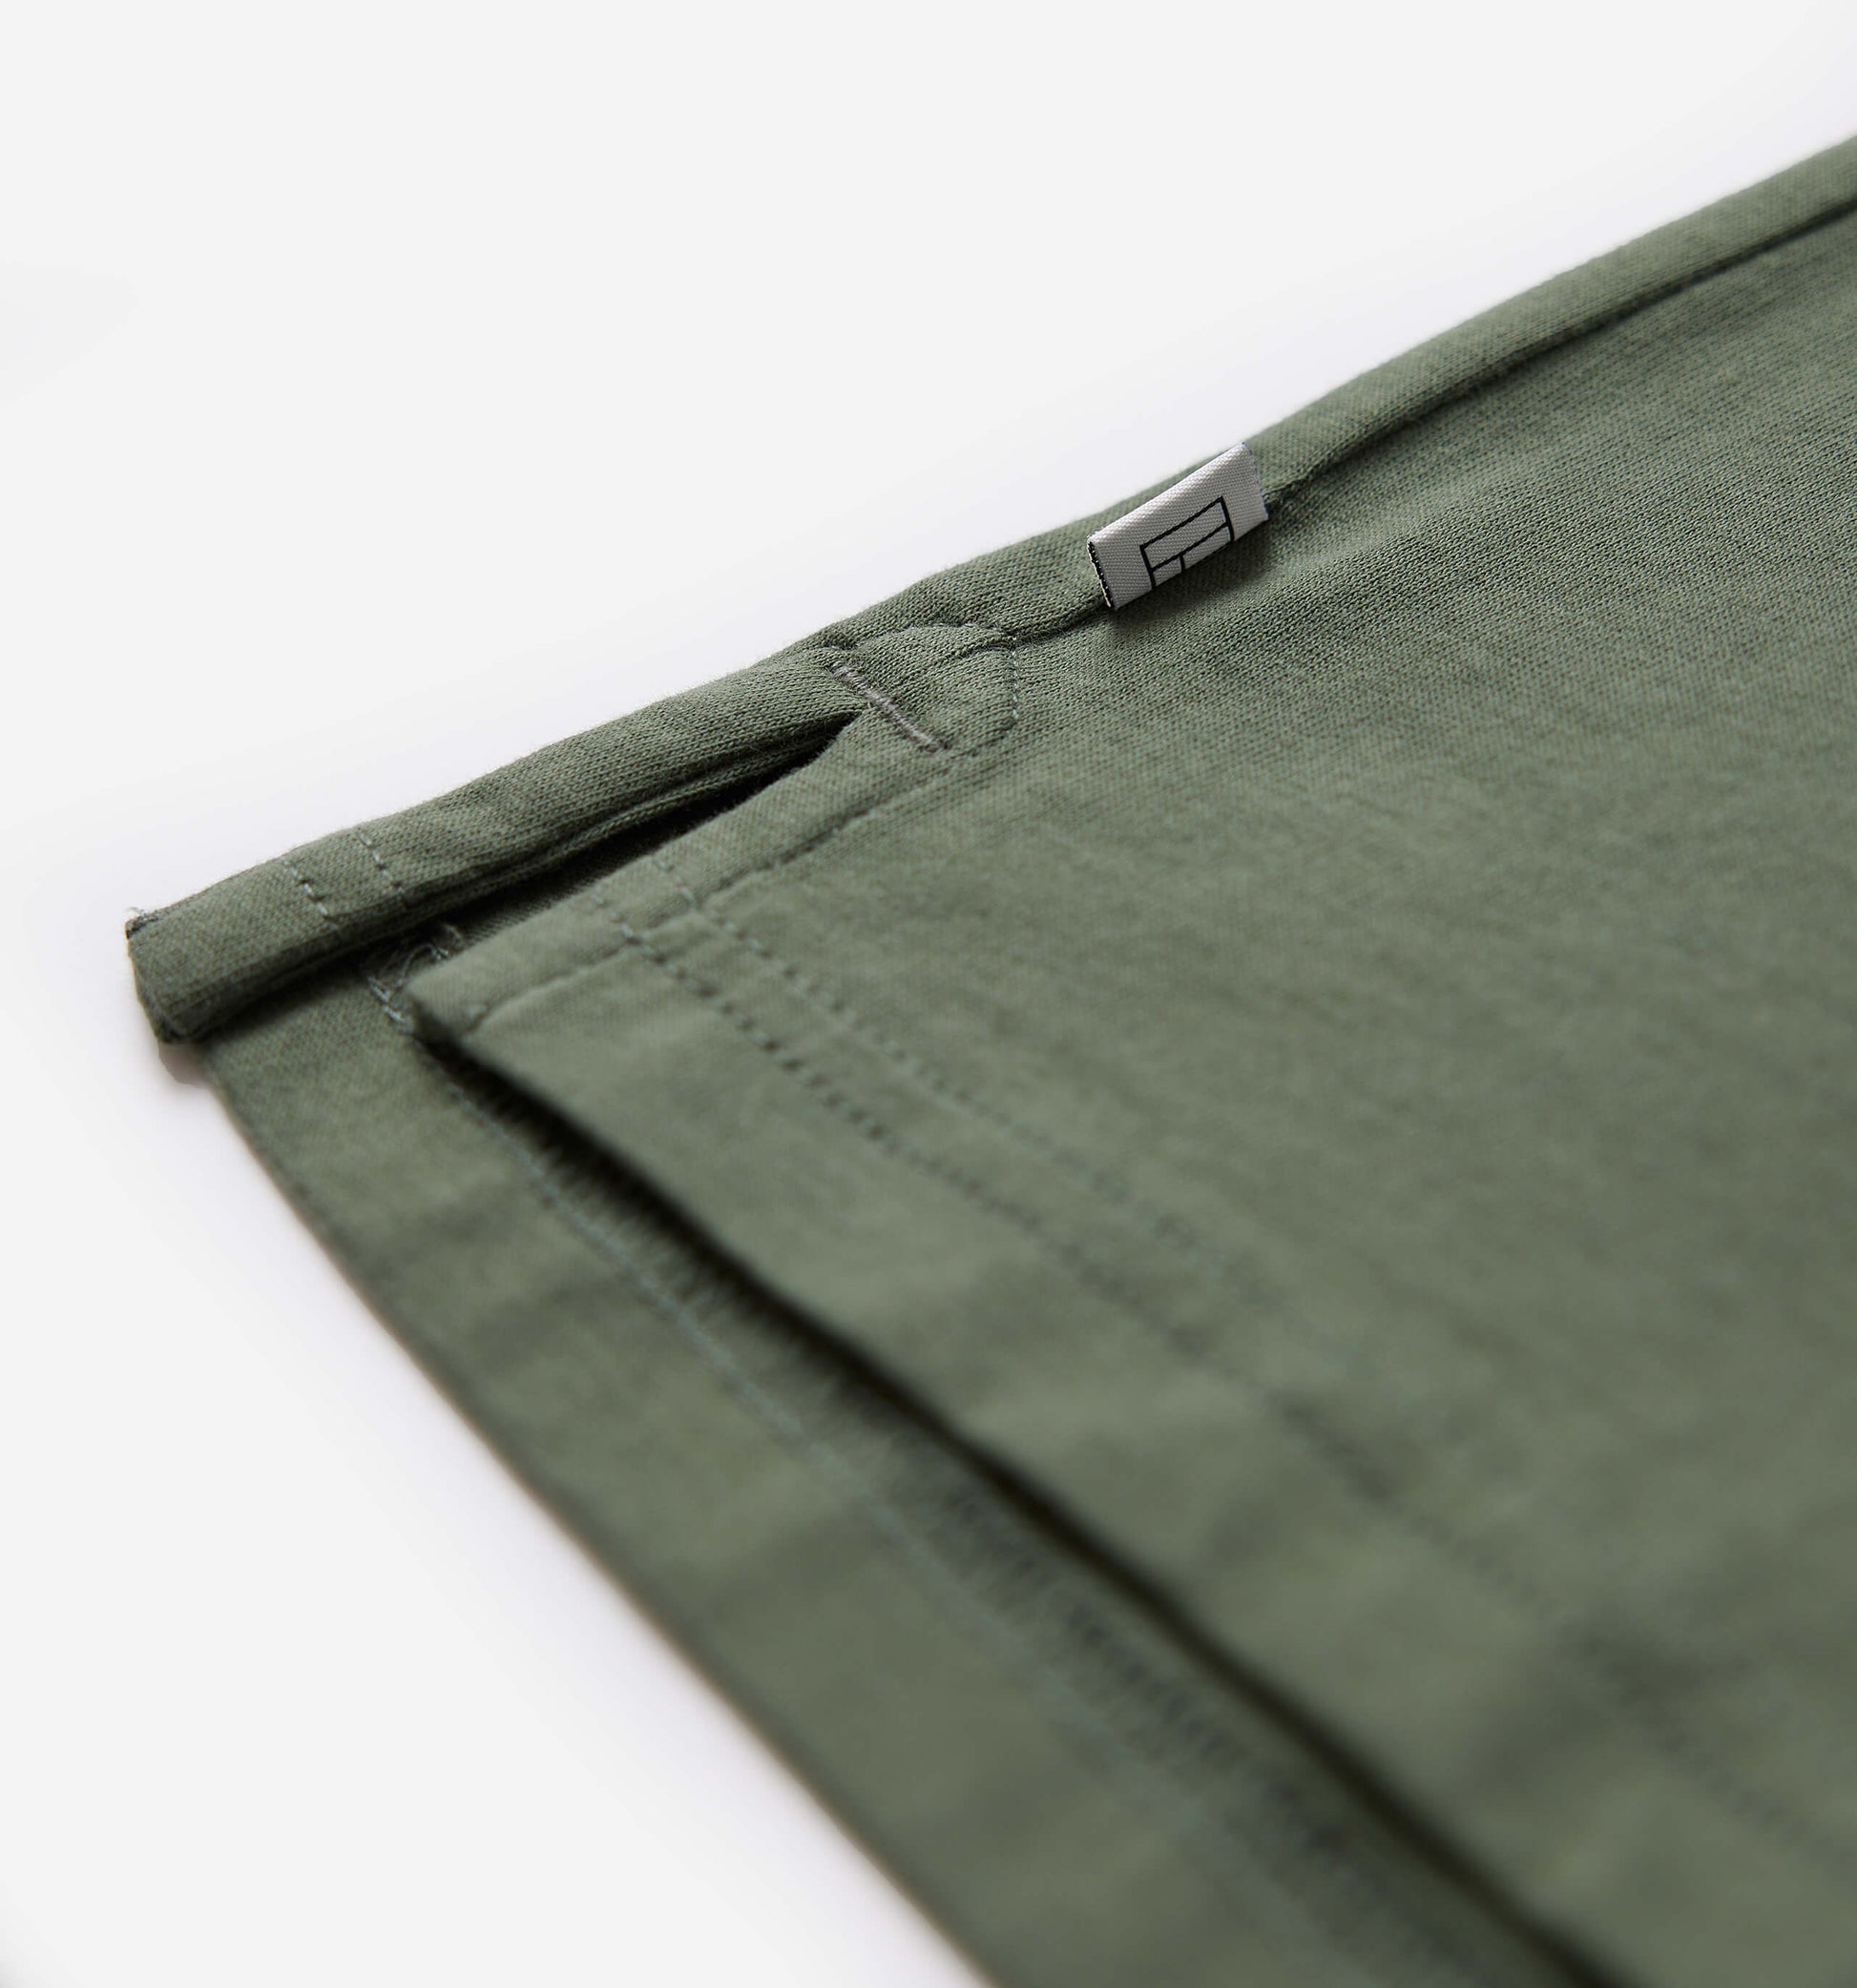 The James - Jersey Cotton Polo In Green From King Essentials